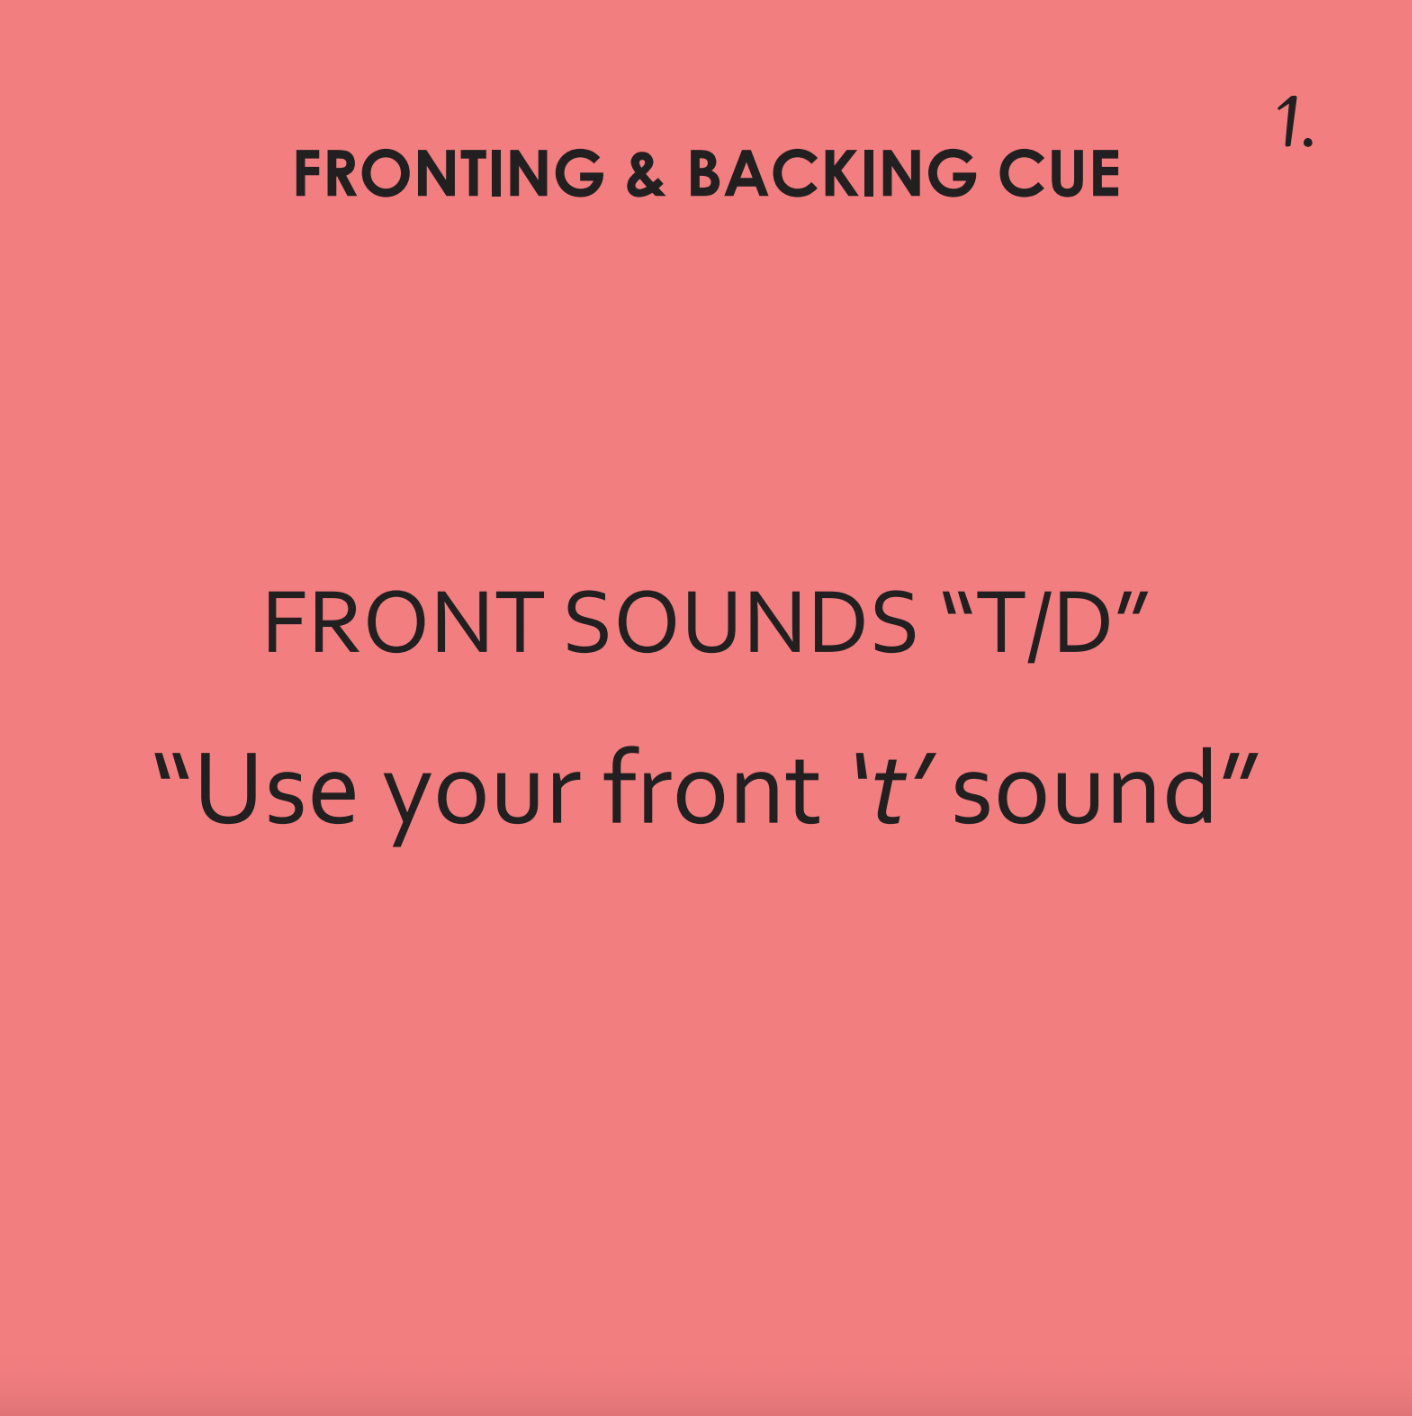 [title]Minimal Pairs: Fronting & Backing